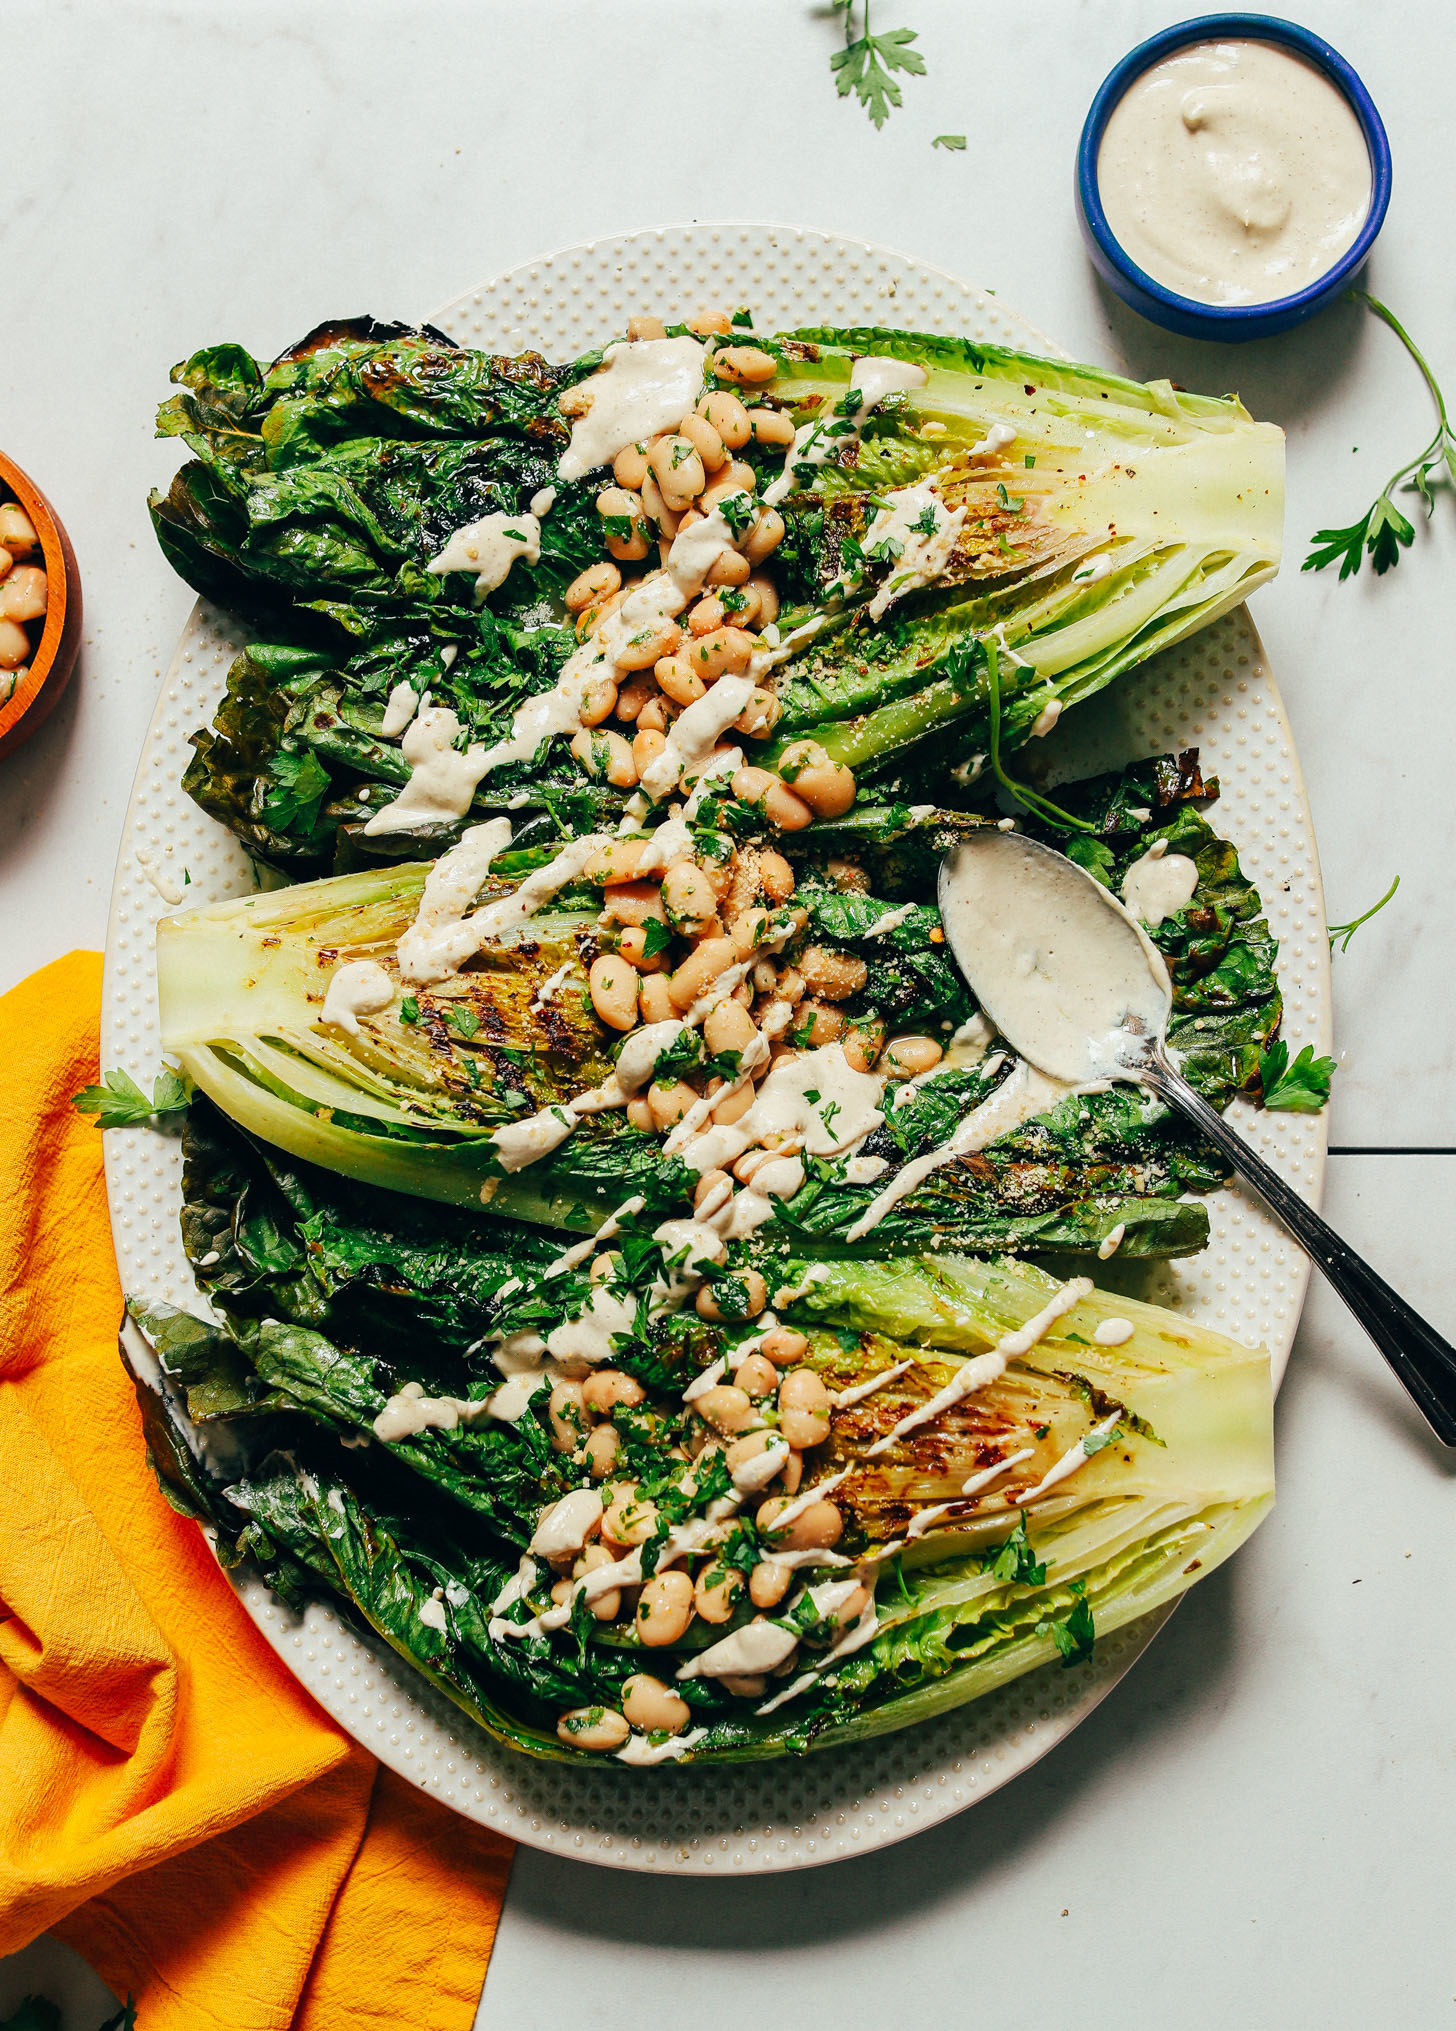 Grilled romaine salad with white beans.